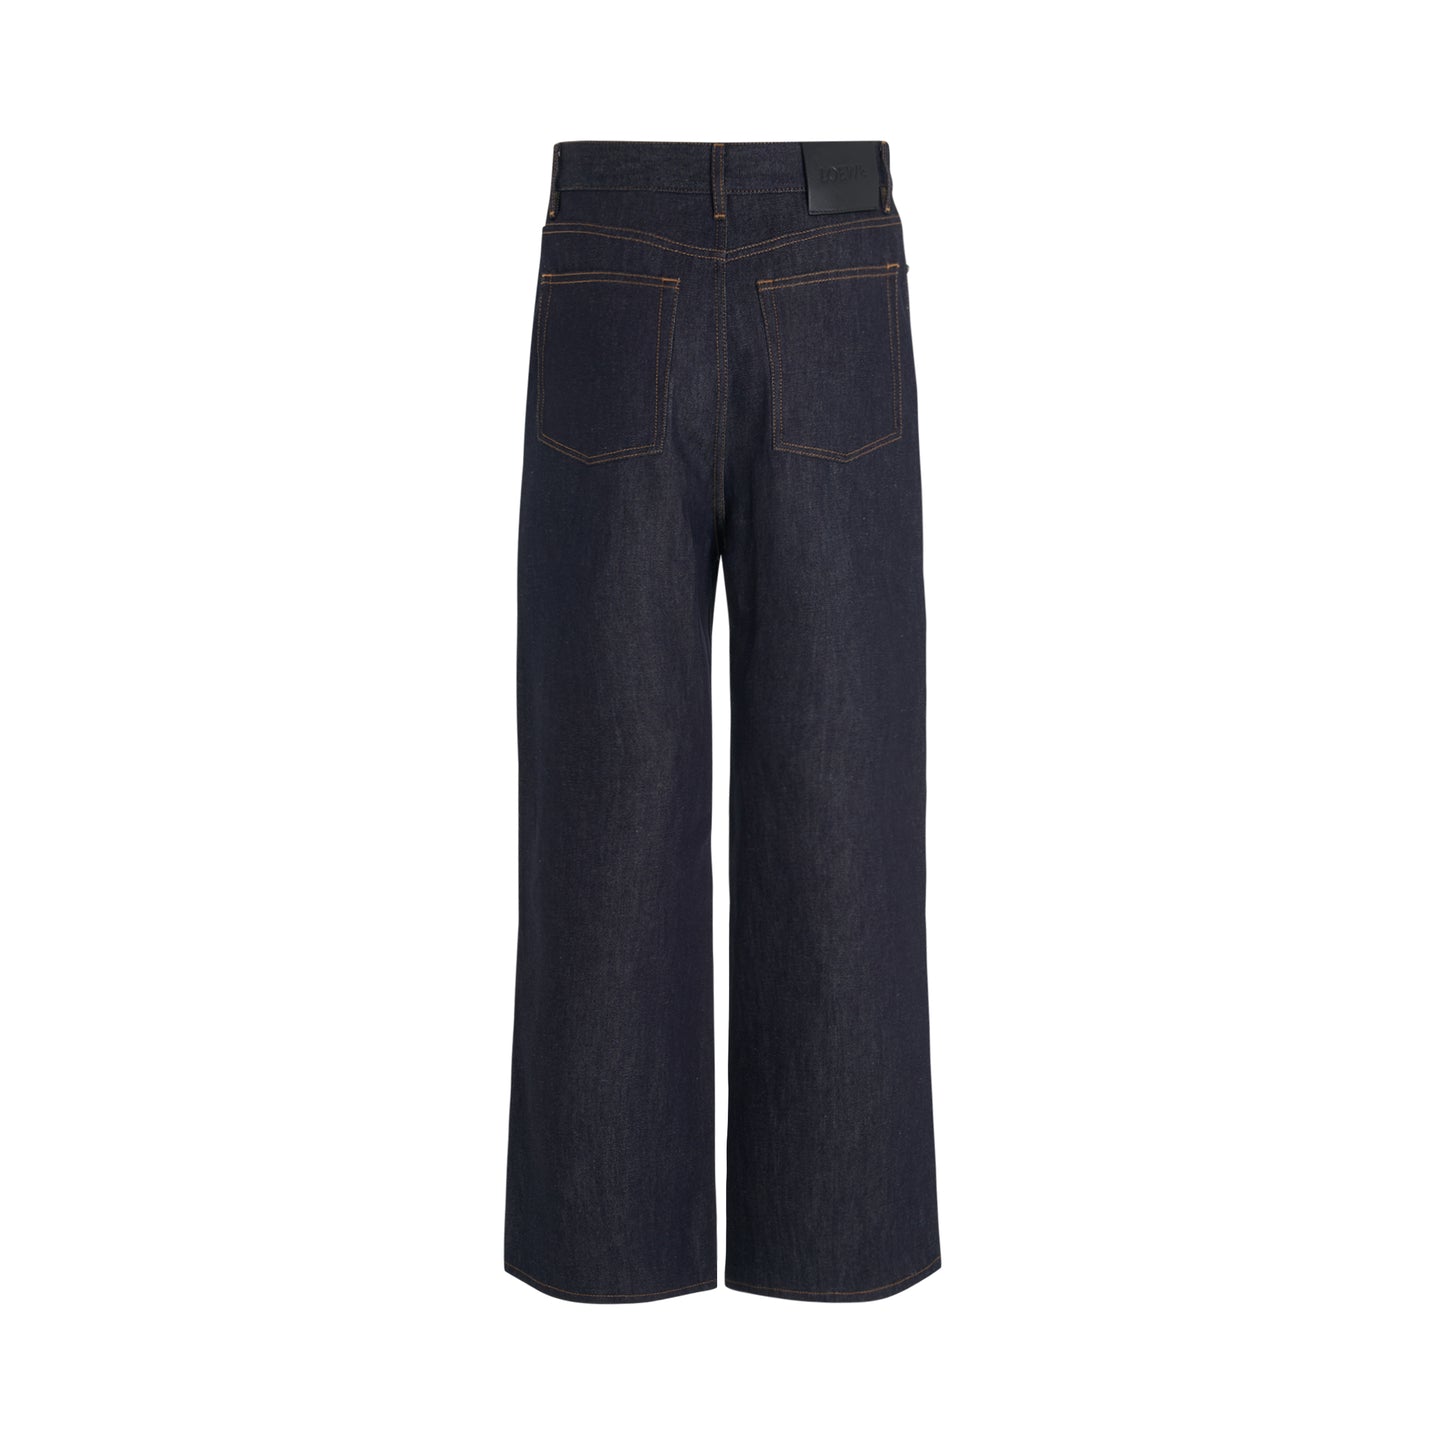 Men High Waisted Jeans in Raw Denim